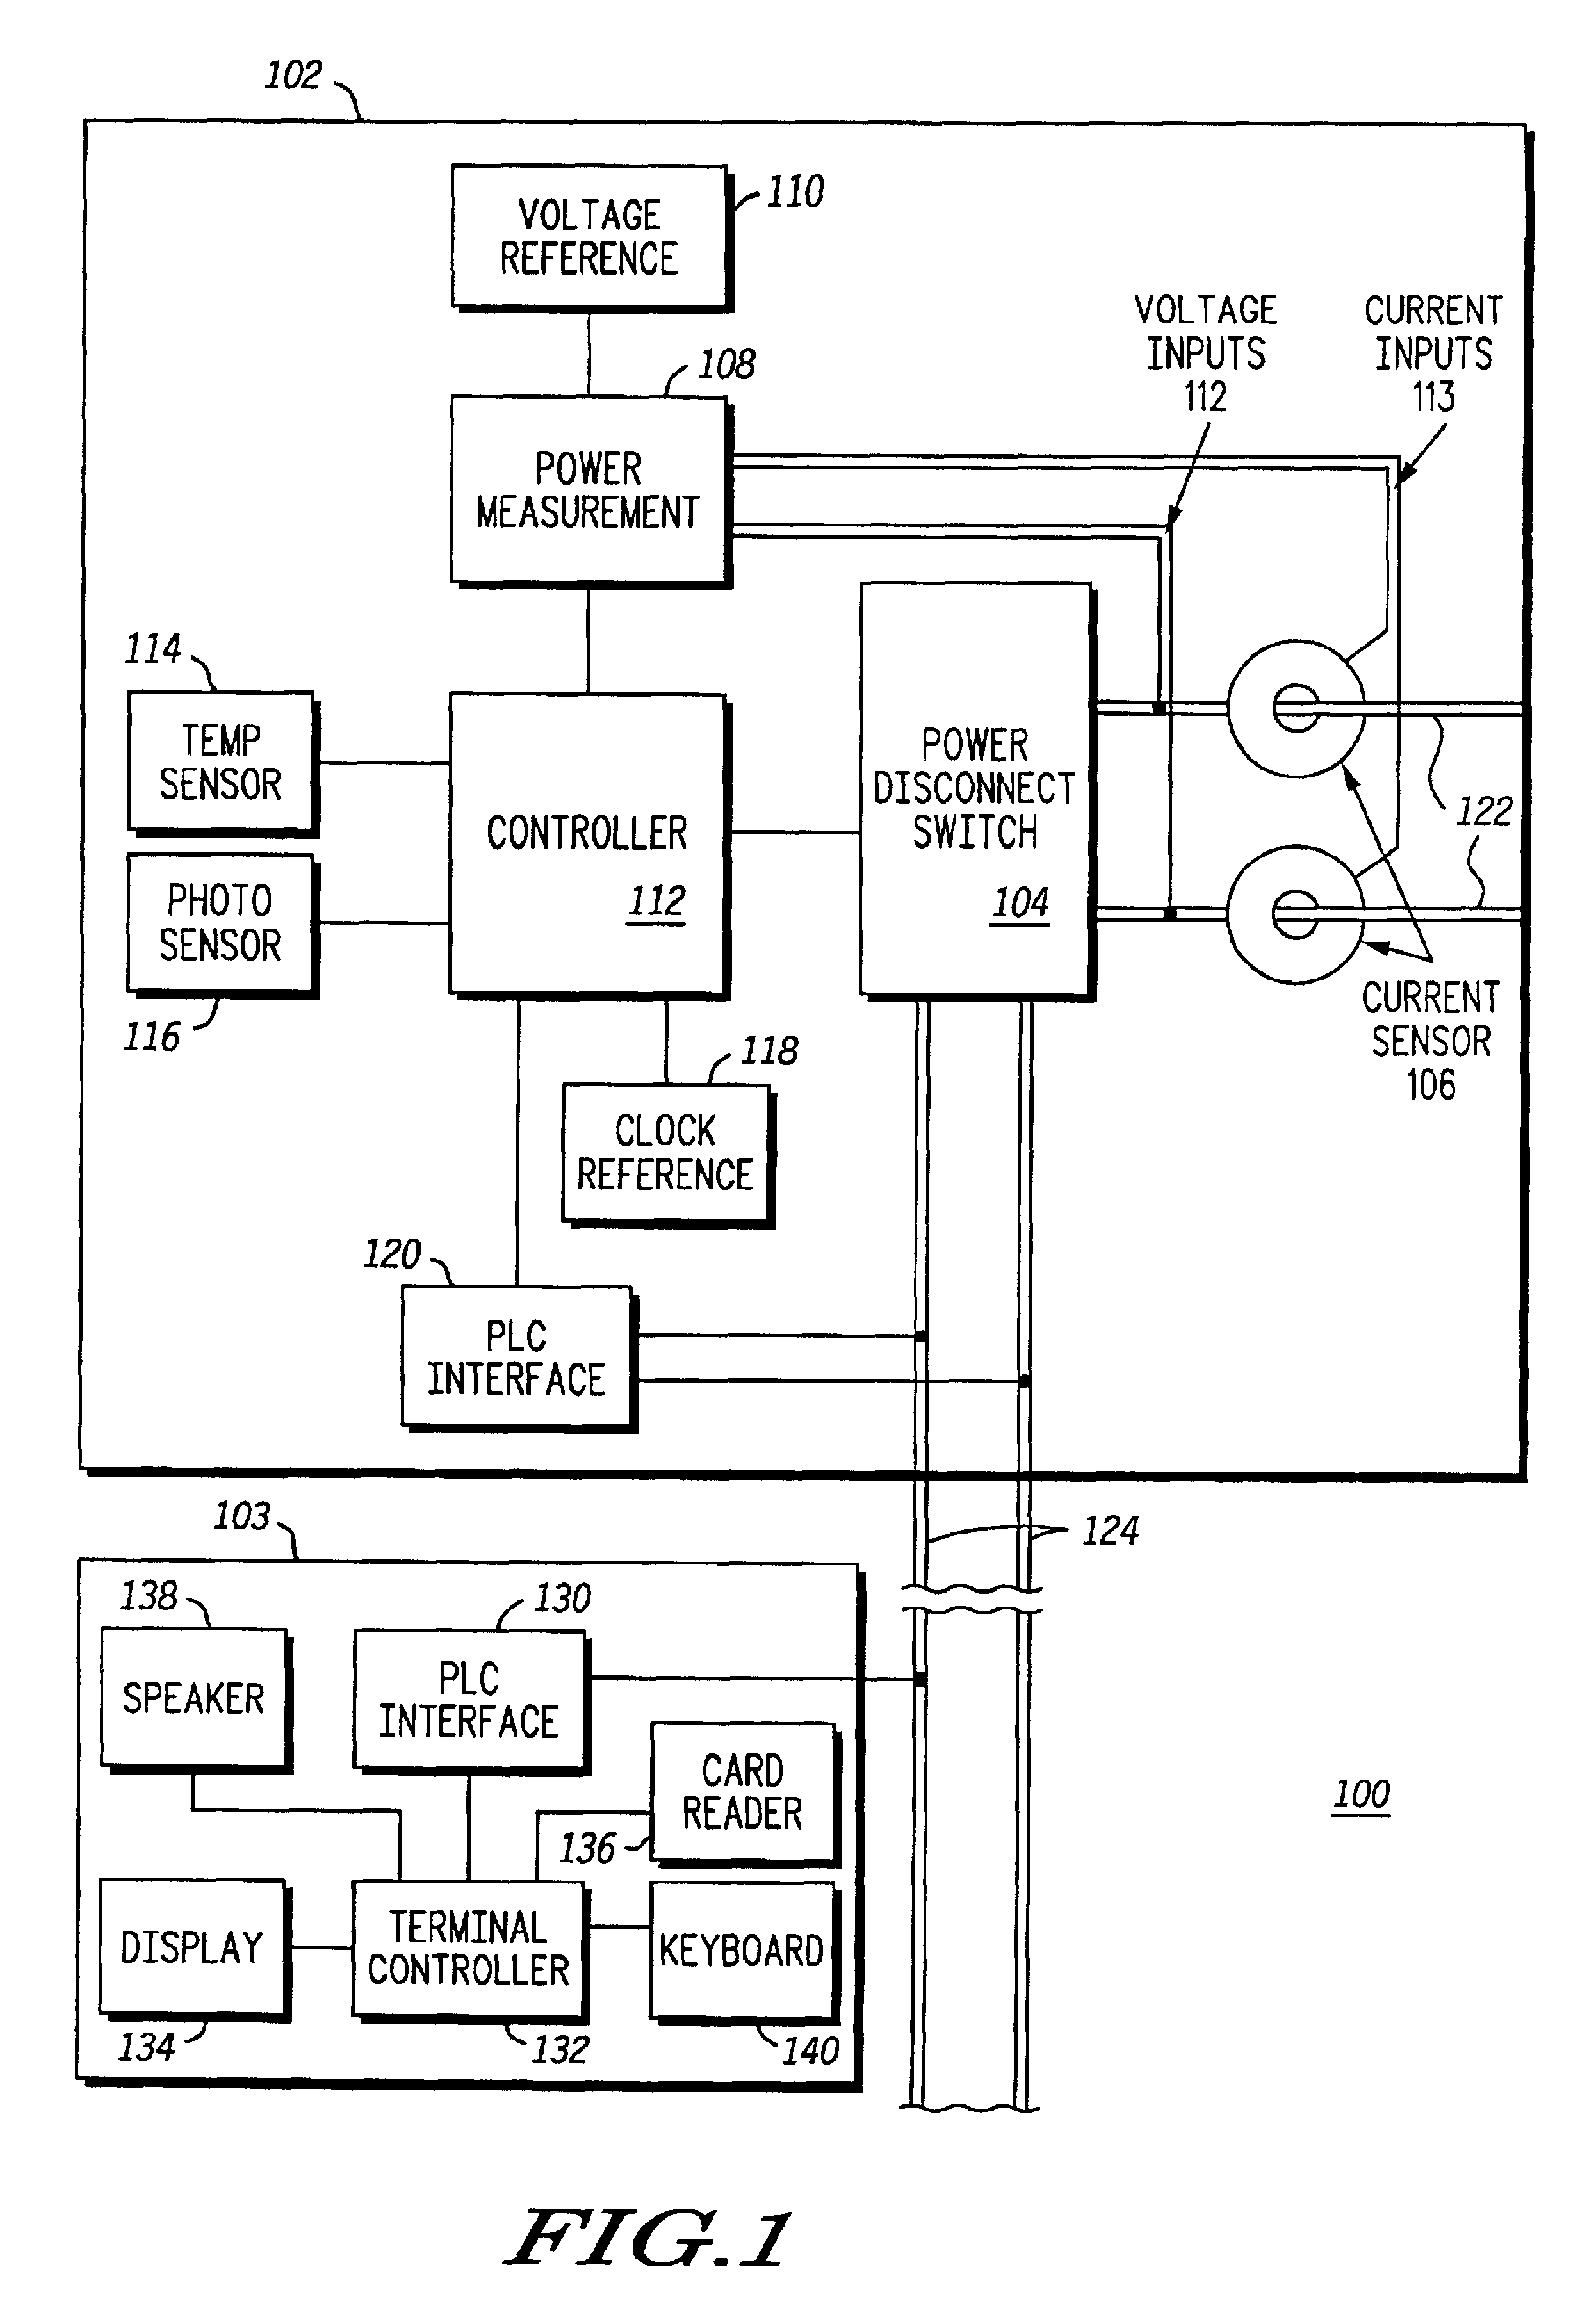 Electric power meter including a temperature sensor and controller